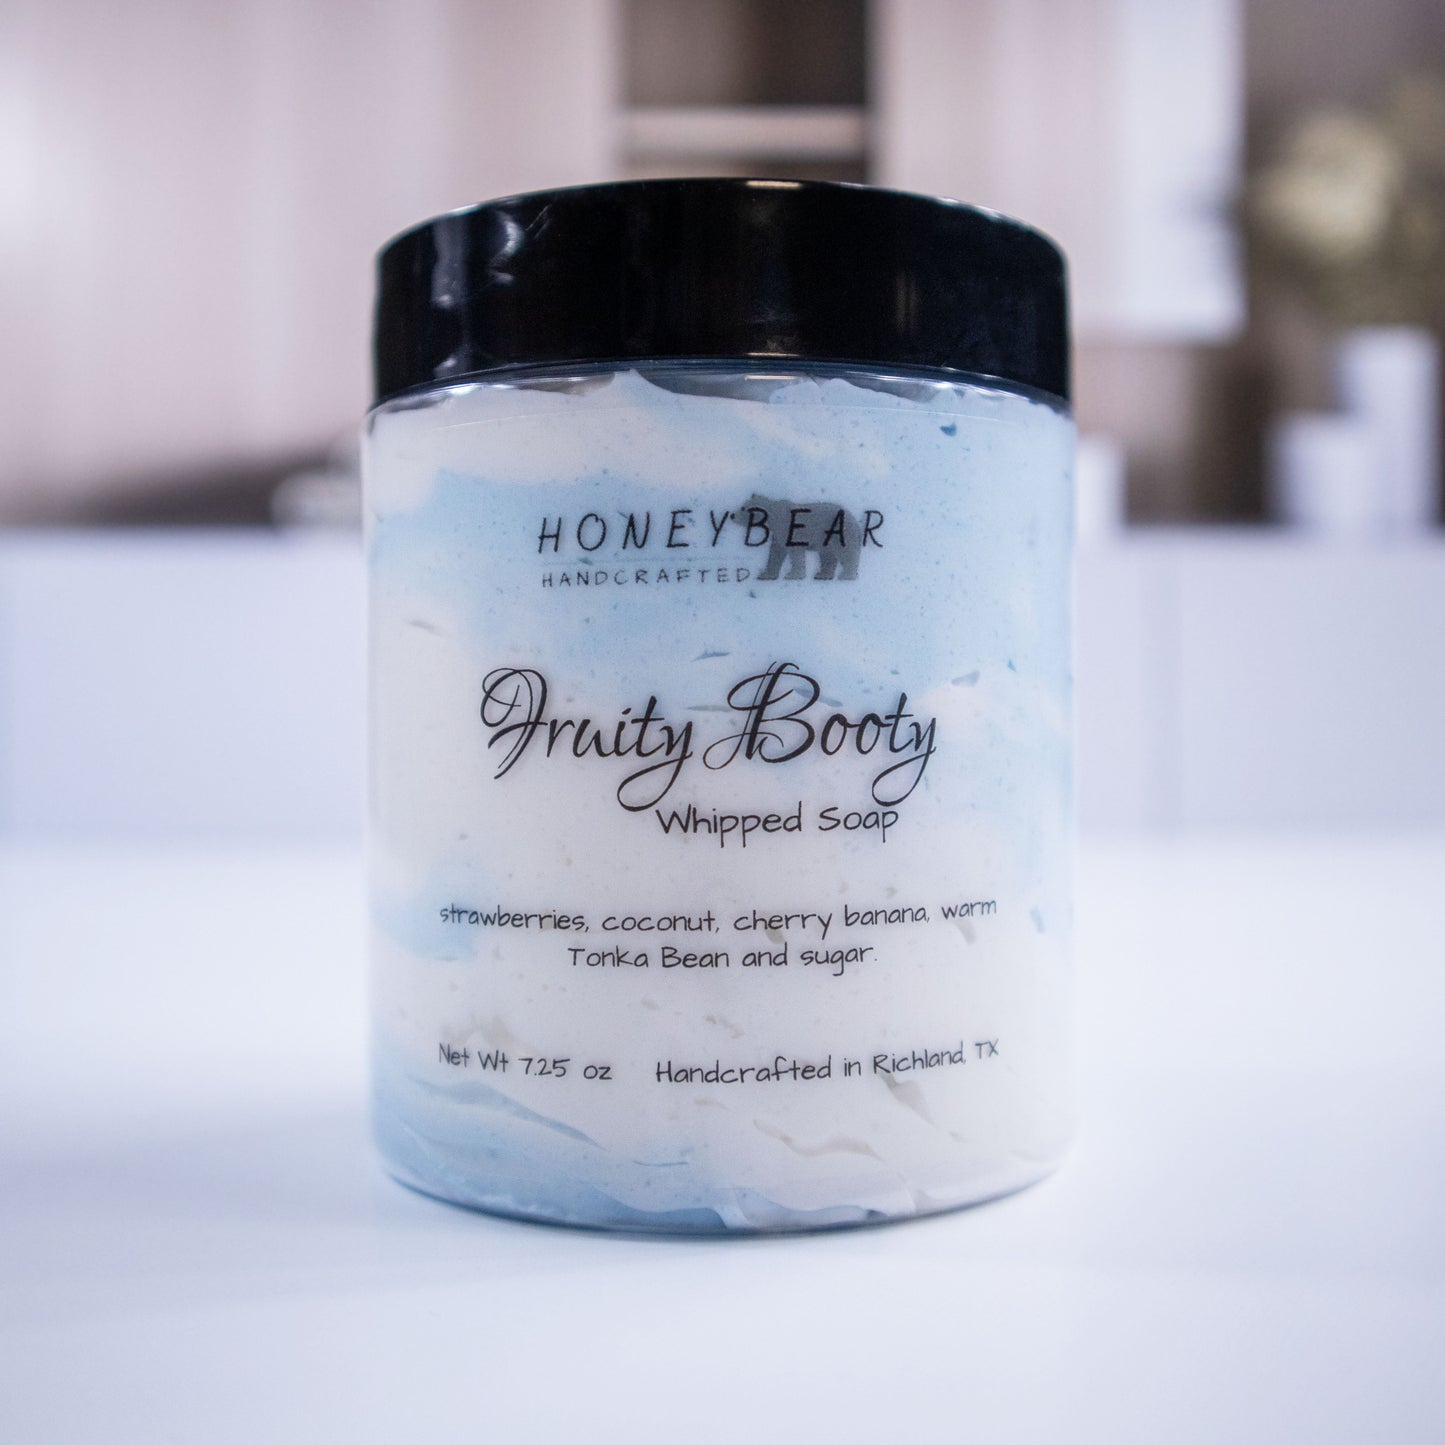 Fruity Booty Whipped Soap